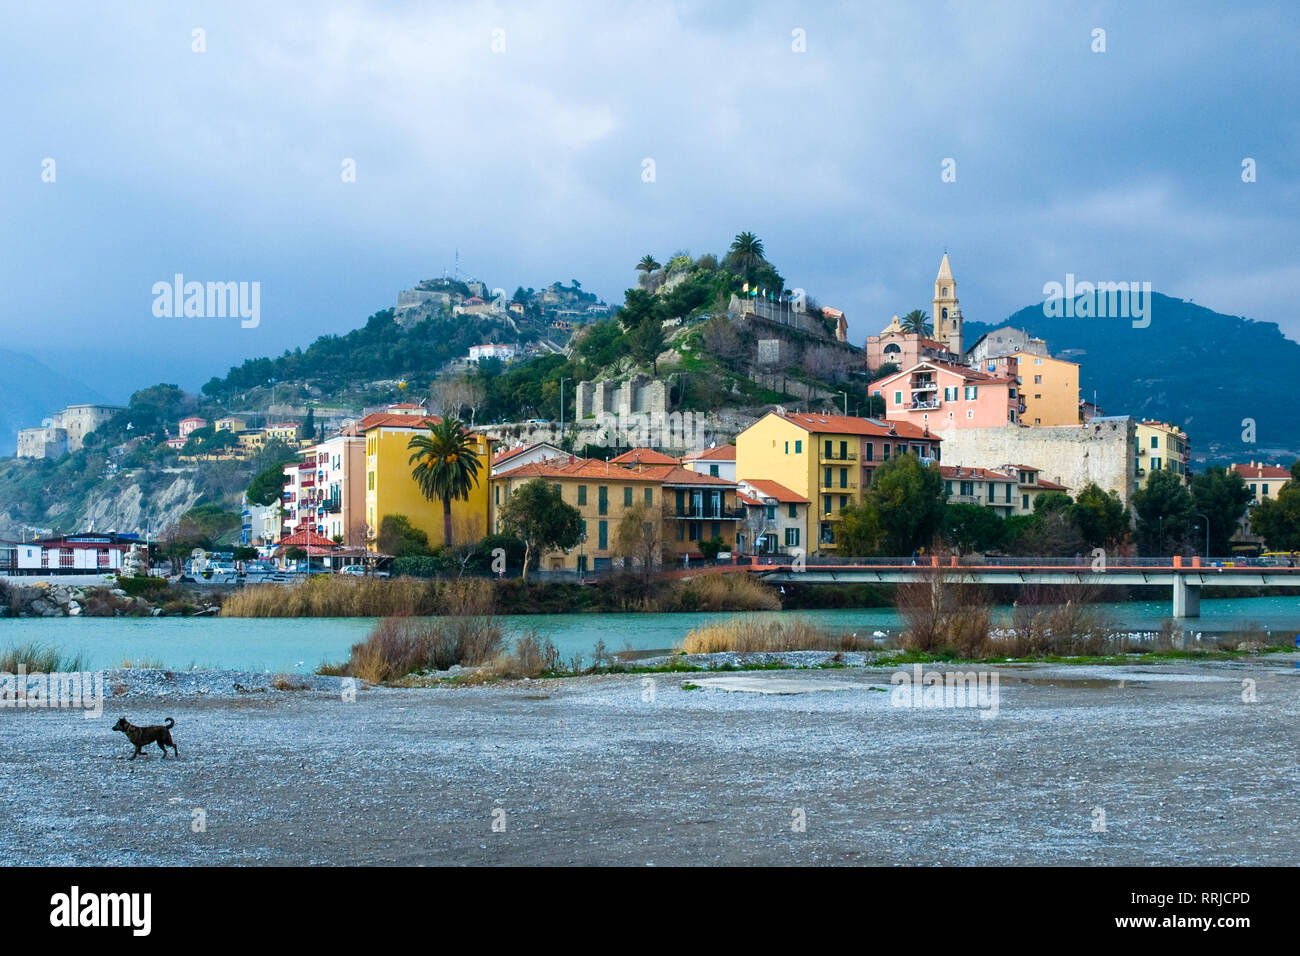 A view of the old town of Ventimiglia, Liguria, Italy, and the Roia River. Stock Photo